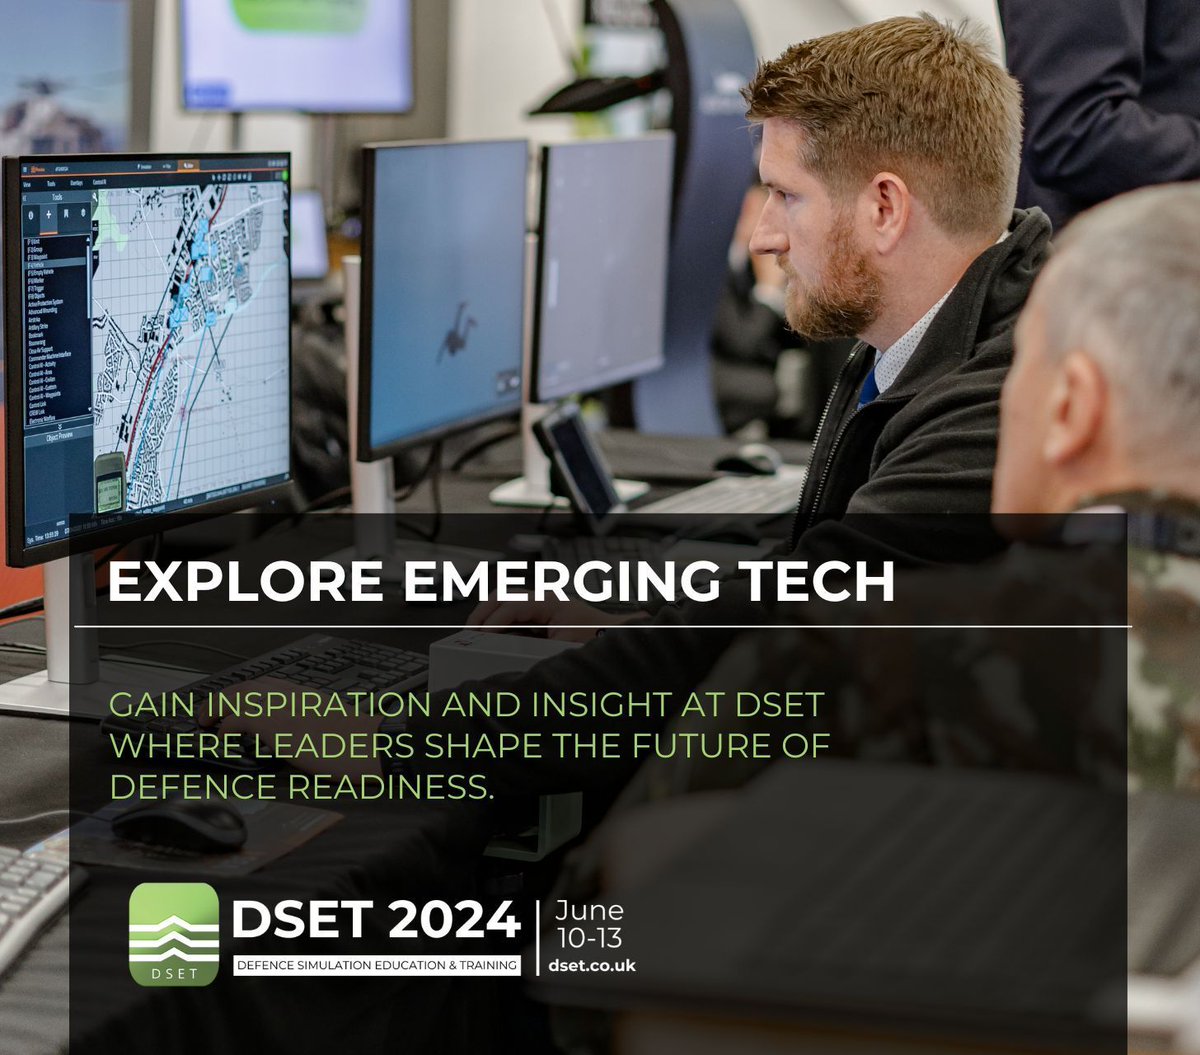 Get hands on with the latest advancements in military education, simulation and training. Explore emerging tech at DSET 2024.

Register today at hopin.com/events/dset-20… 

DSET is FREE to attend for Military, Government and Academia.
#MilitaryTraining #MilitarySimulation #Defence